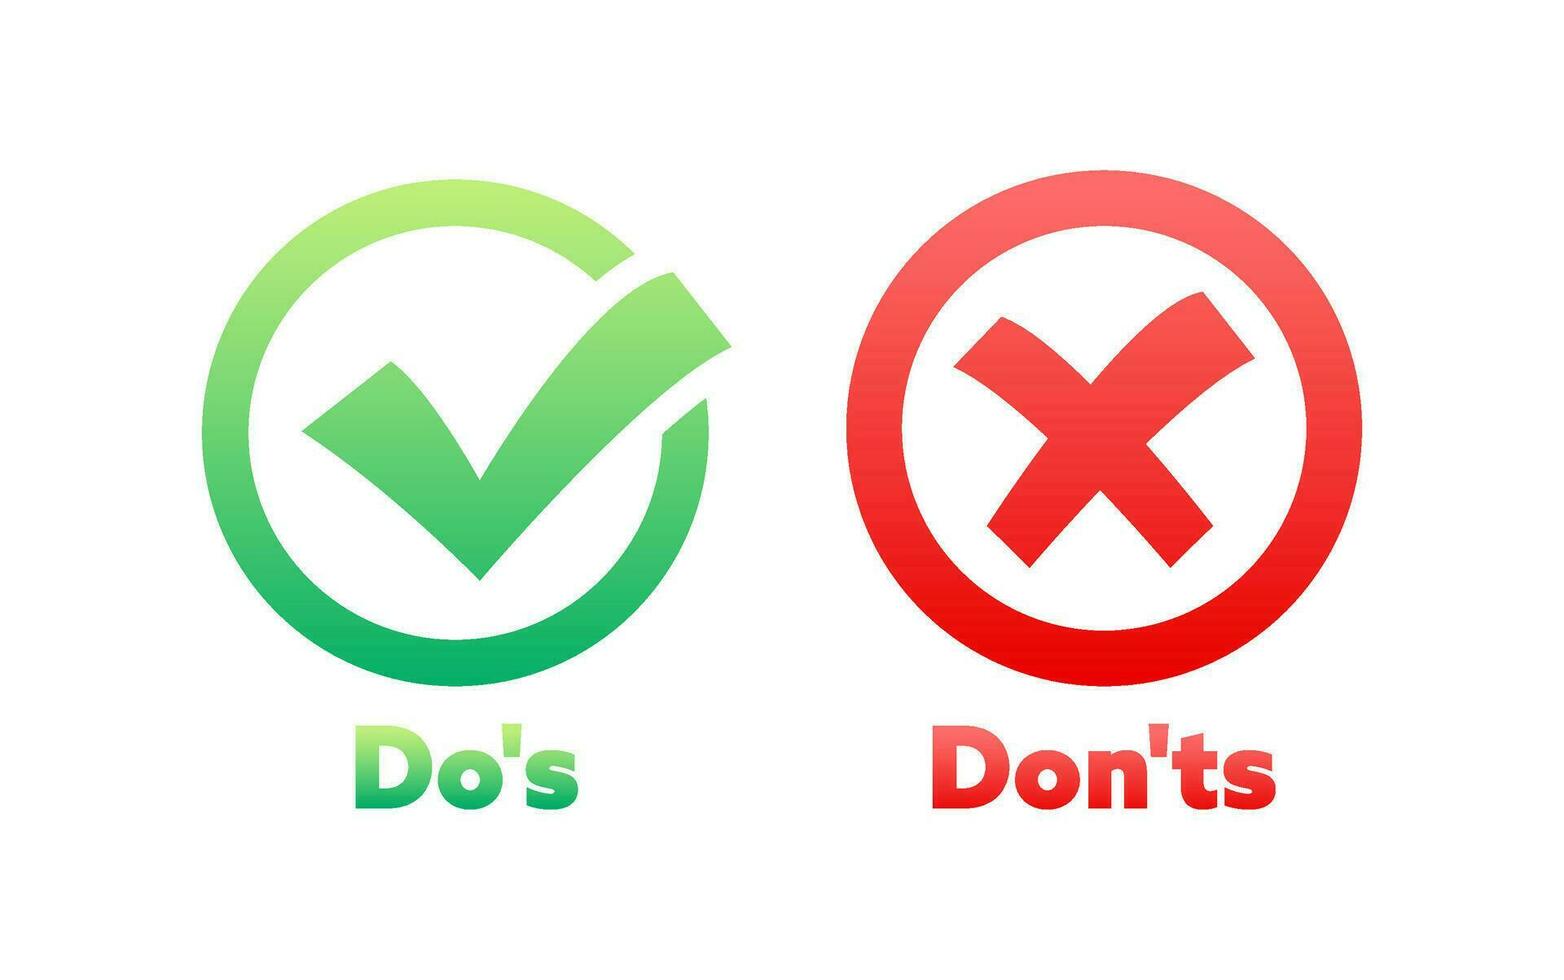 Dos and Donts label sticker. Green check mark yes and red cross no icon. Vector stock illustration